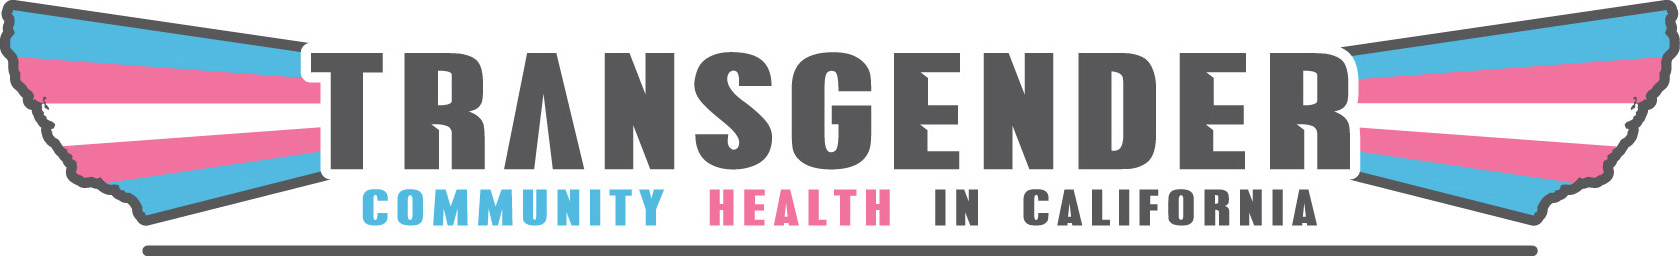 Header saying Transgender Community Health in California, and displaying the transgender flag colors